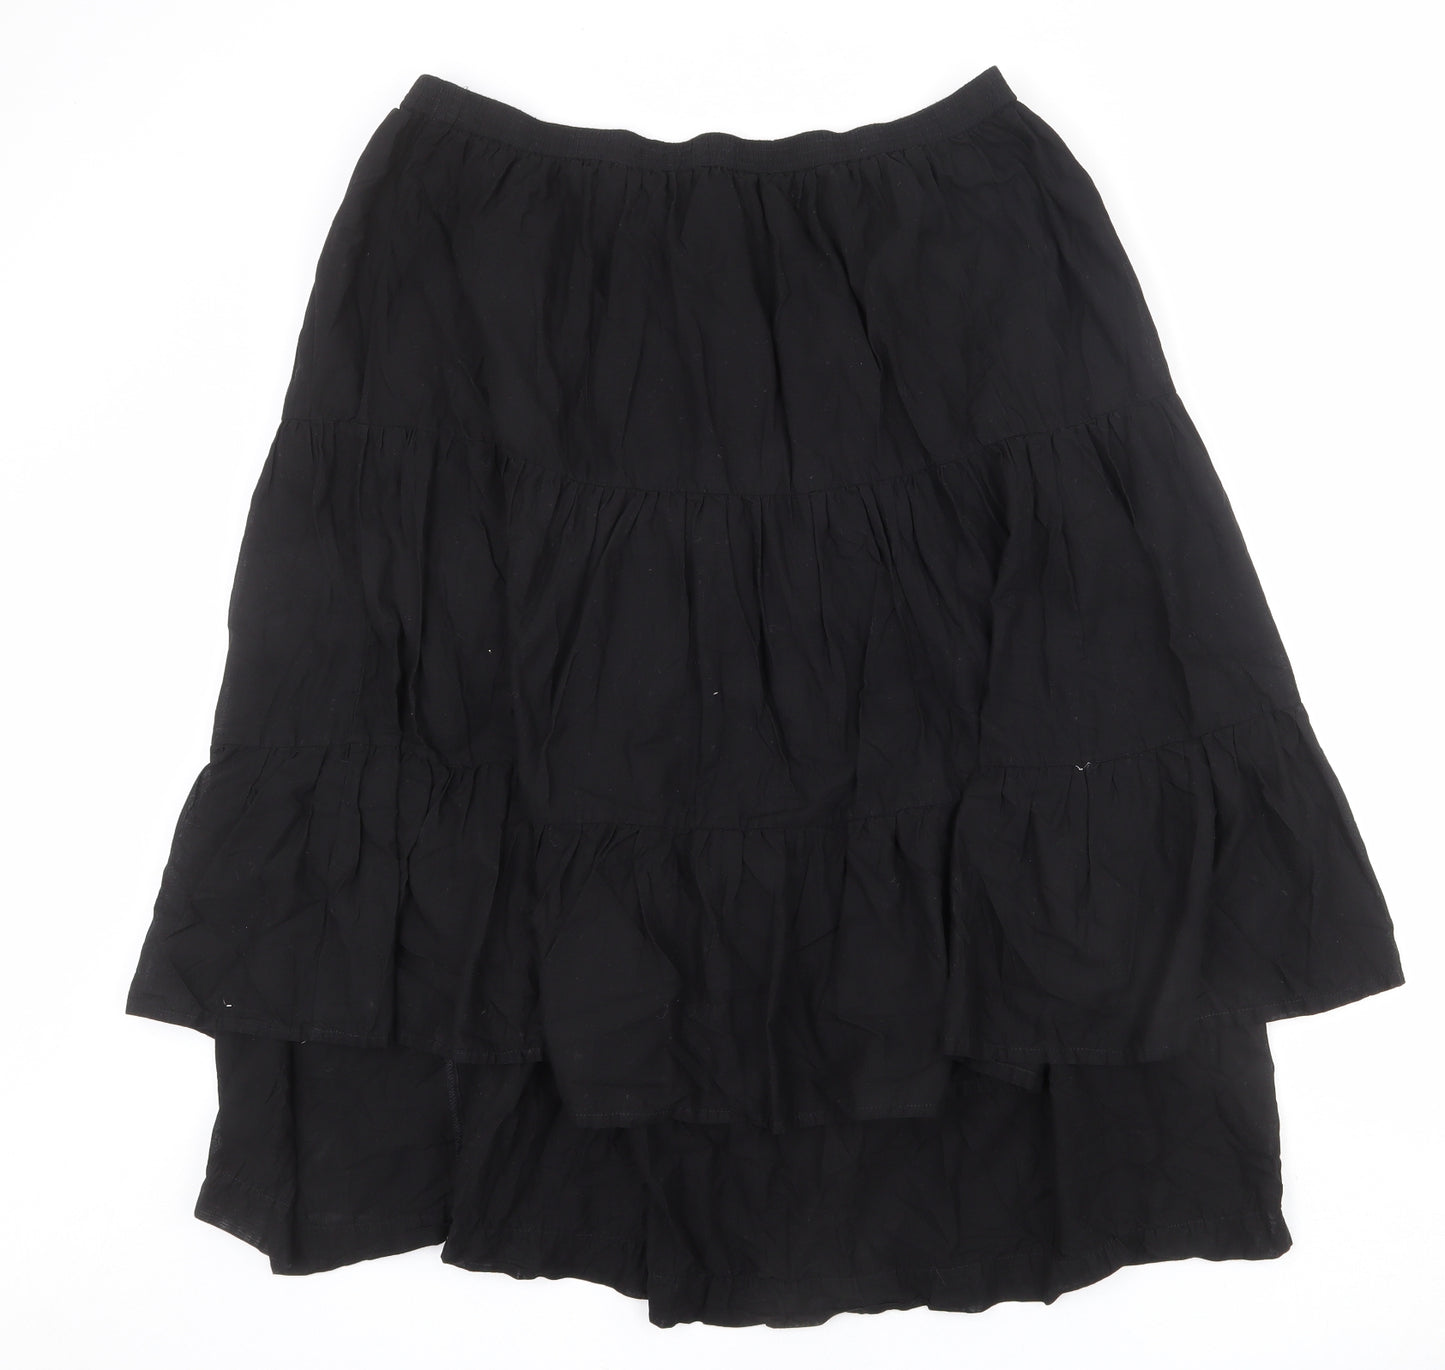 Marks and Spencer Womens Black Cotton Peasant Skirt Size 16